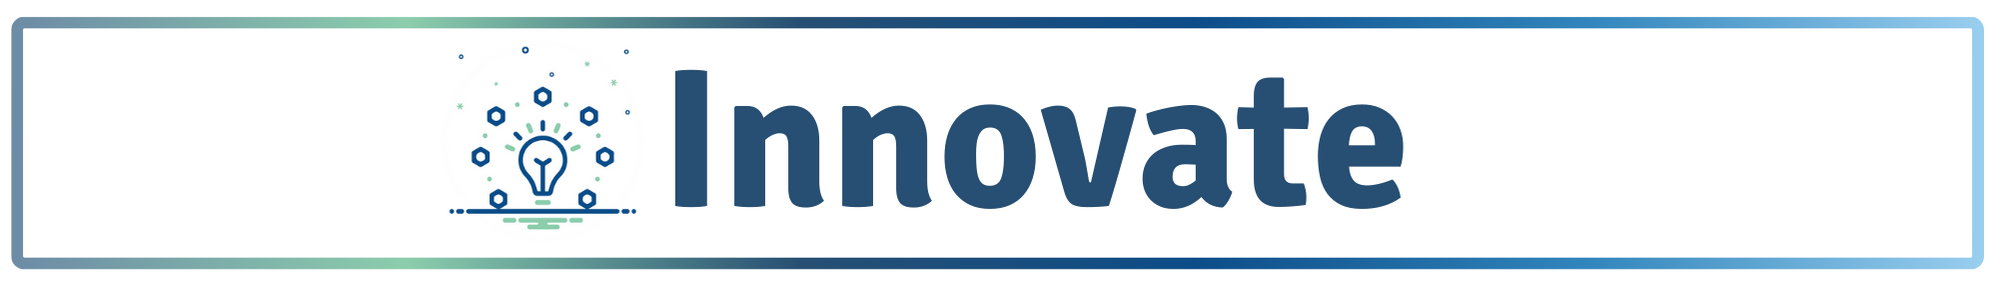 Banner that says innovate